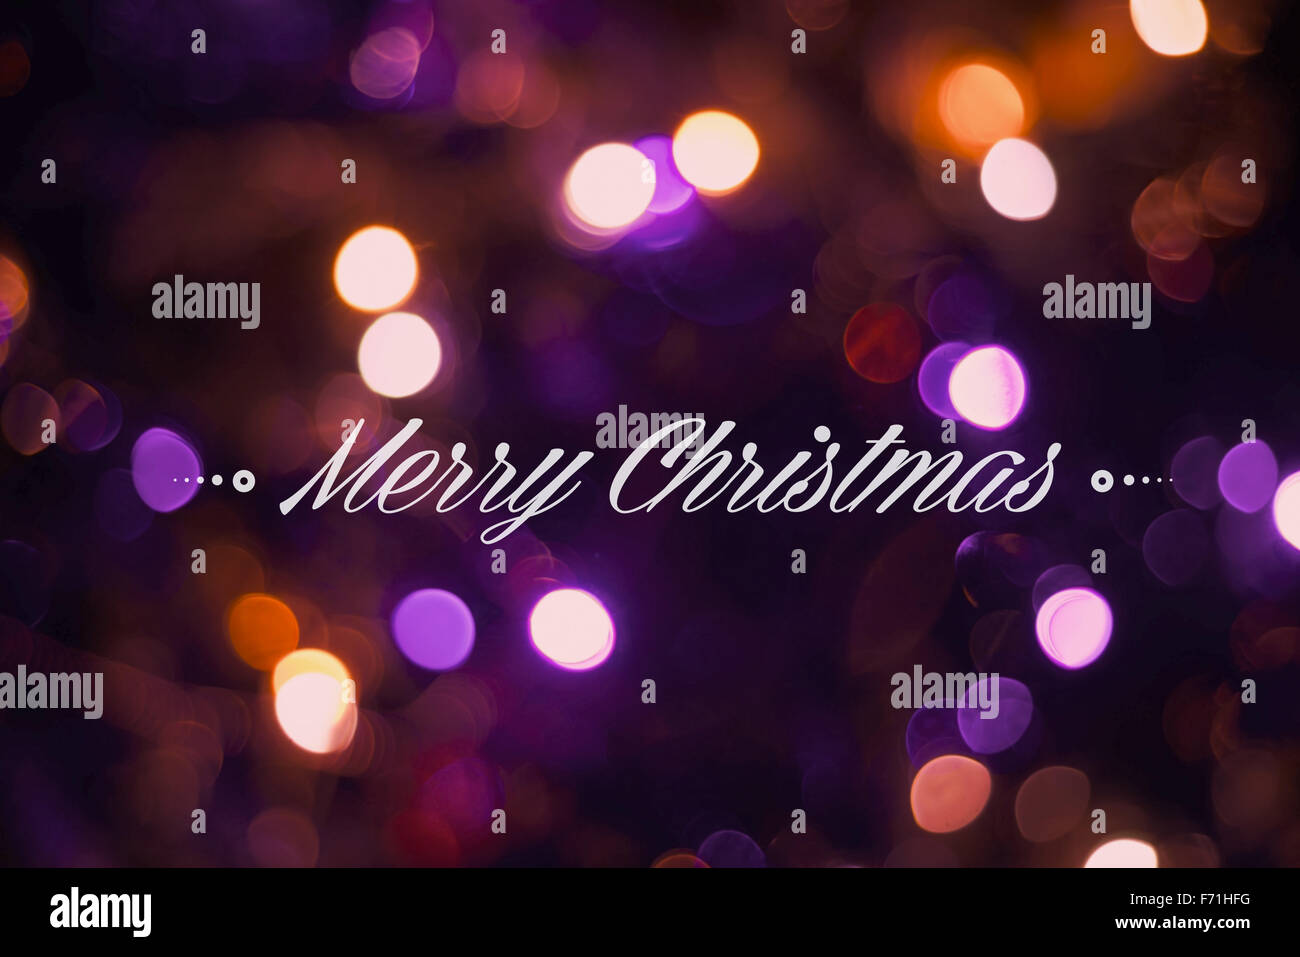 Merry christmas elegant bokeh style background with colorful blurs and defocused lights. Ideal for xmas greeting card, holiday Stock Photo